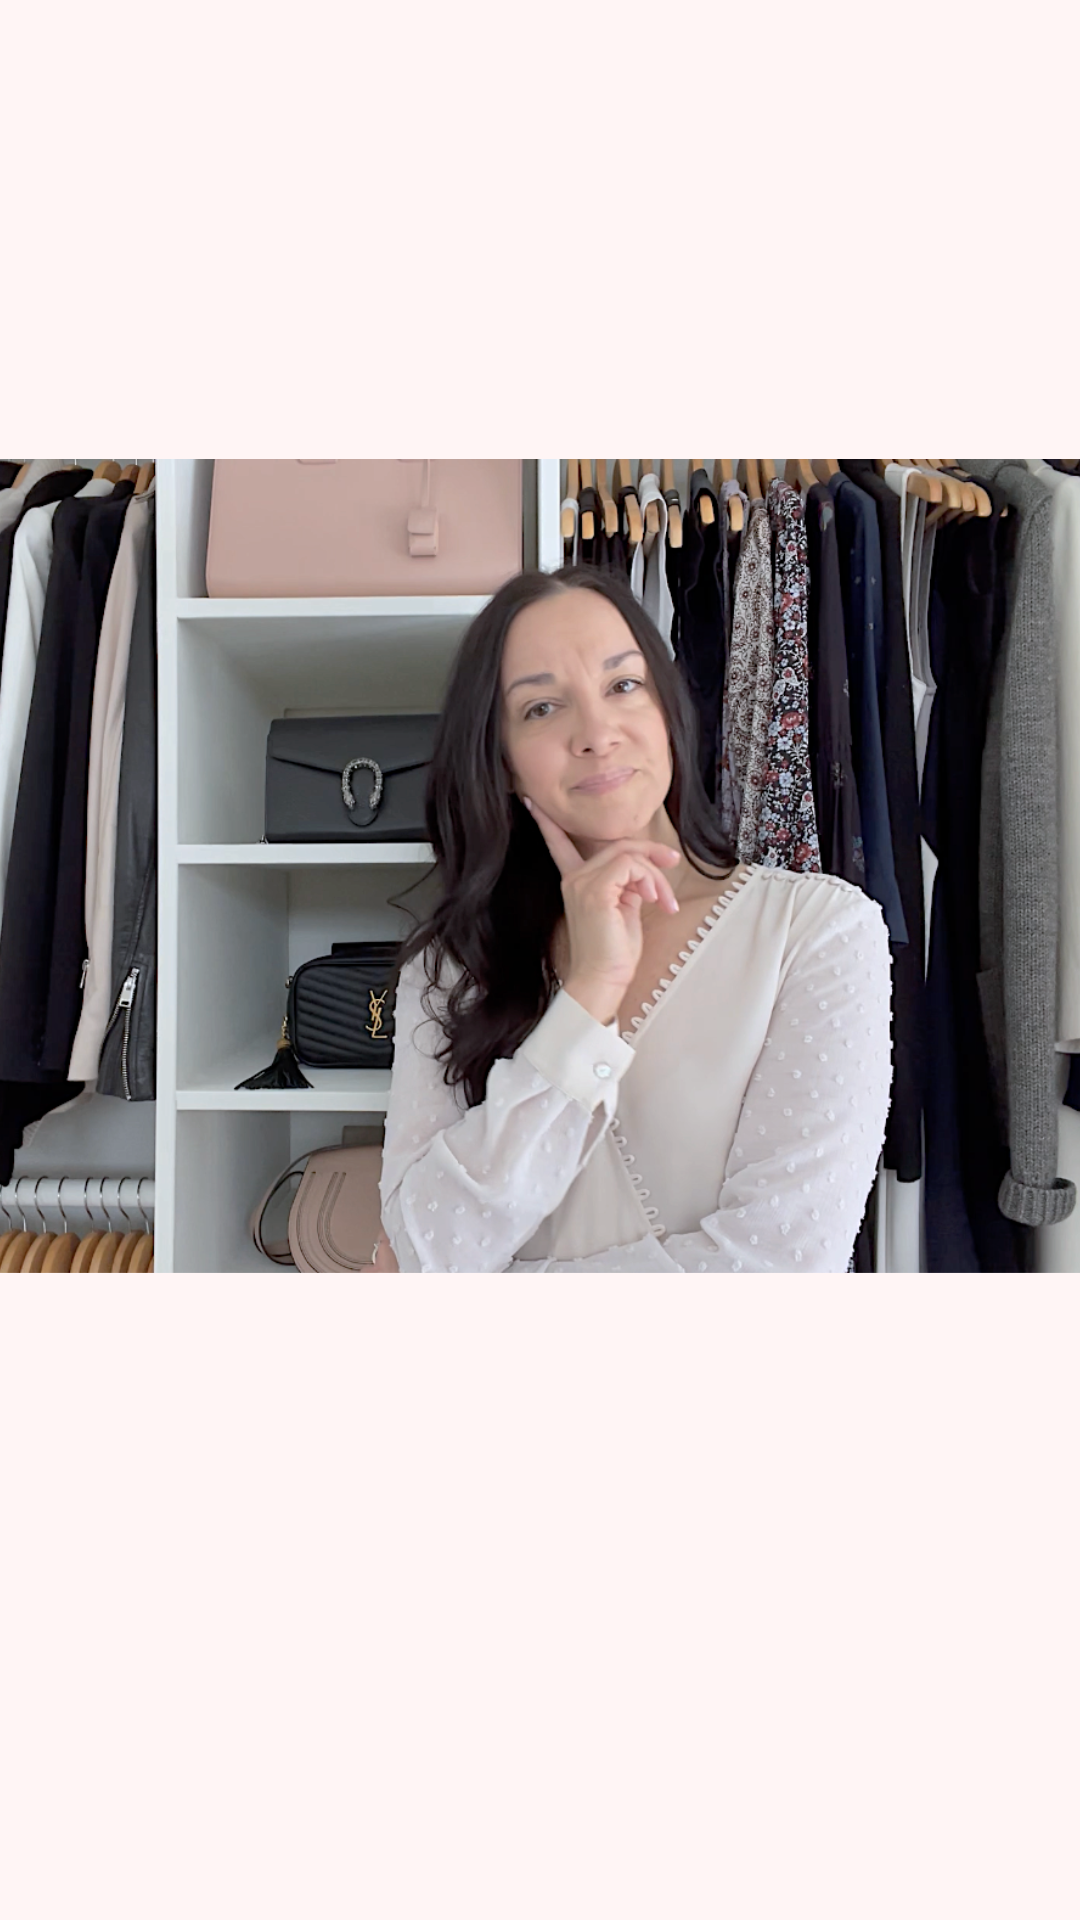 Find Your Style Quiz | Is Your Wardrobe Working? Erica Ball Style